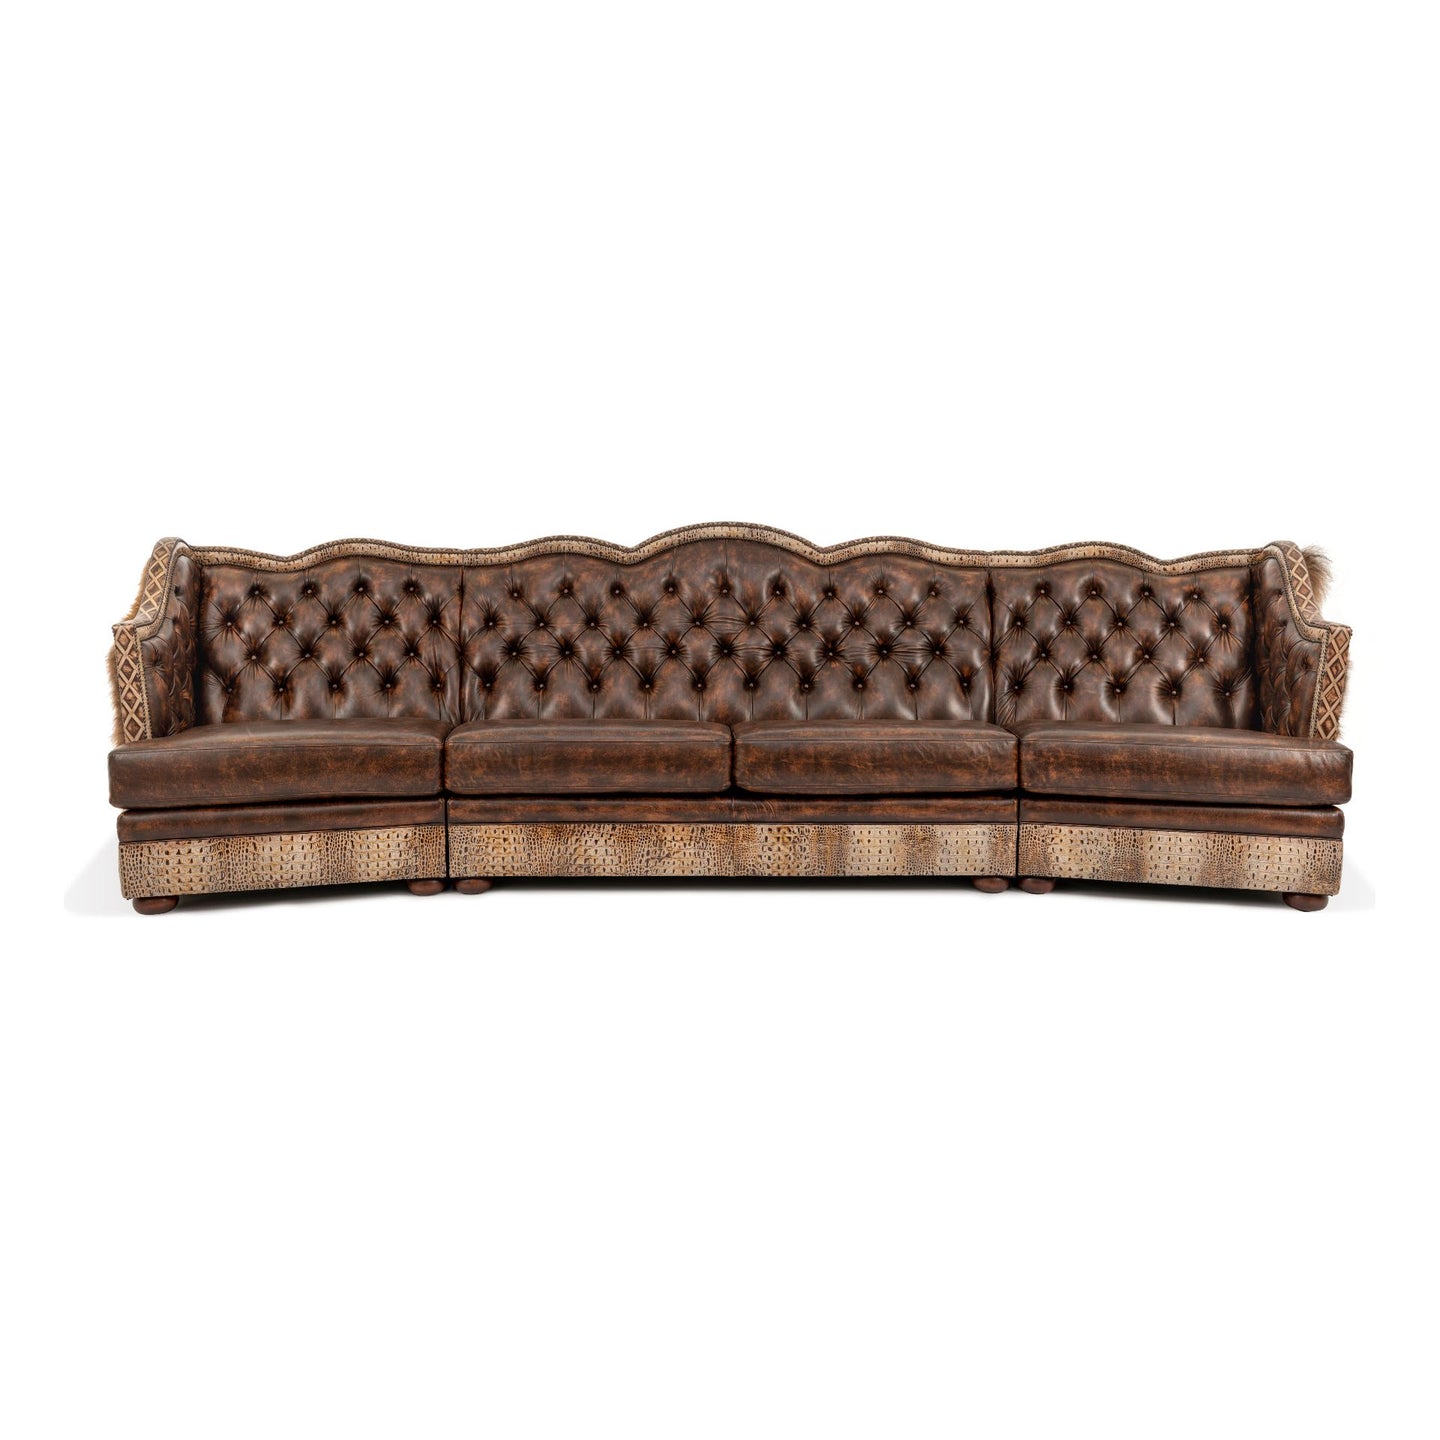 Yellowstone Curved Tufted Sectional Sofa